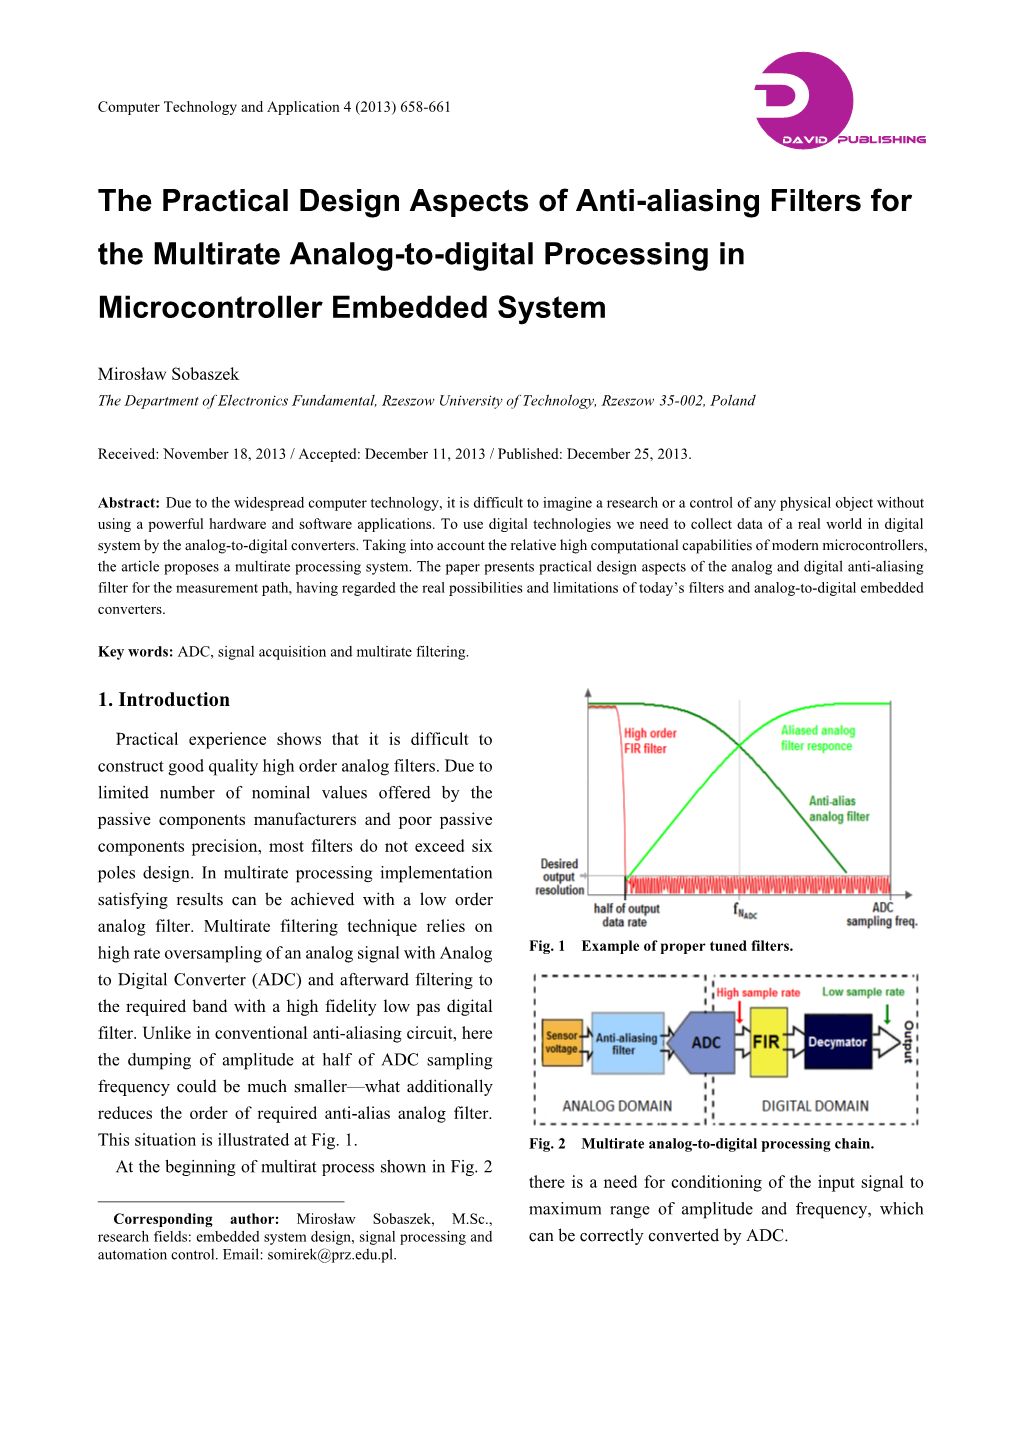 The Practical Design Aspects of Anti-Aliasing Filters for the Multirate Analog-To-Digital Processing in Microcontroller Embedded System